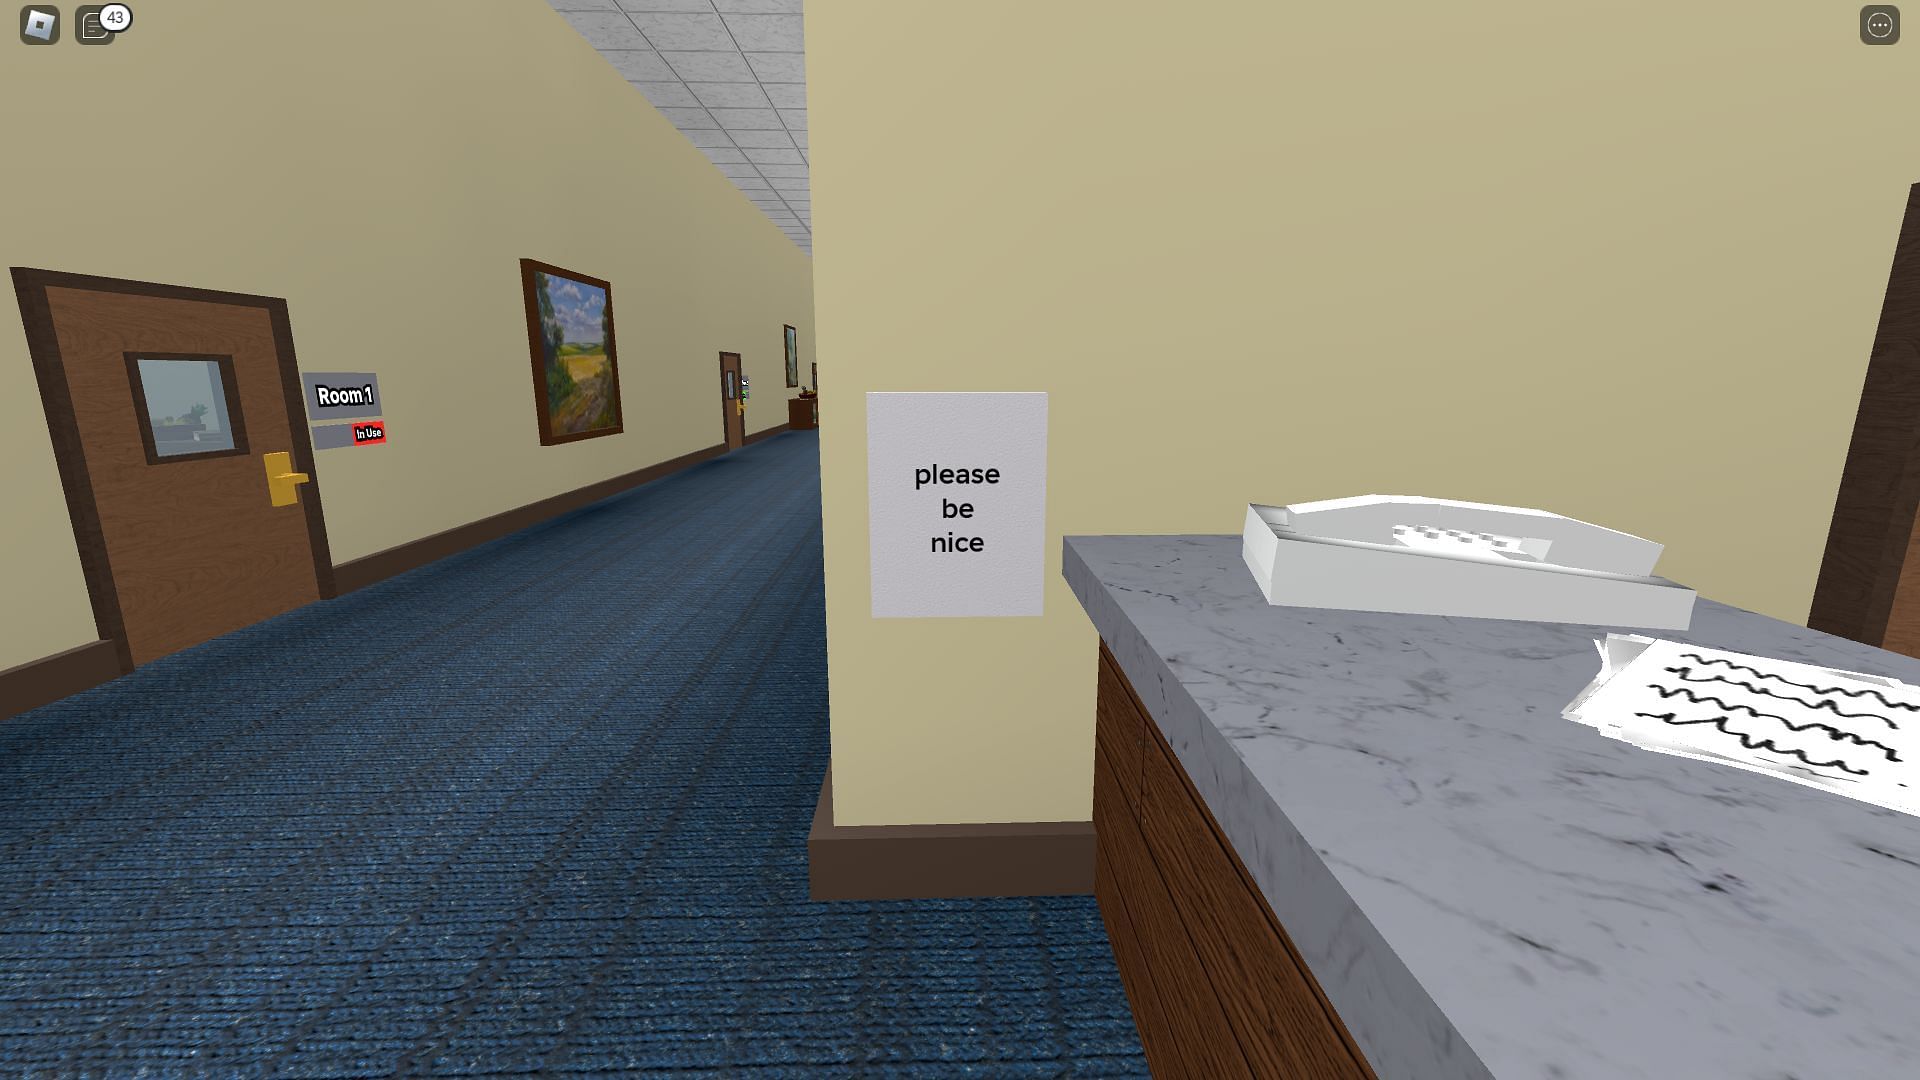 Inside the Therapy Center (Image via Roblox)